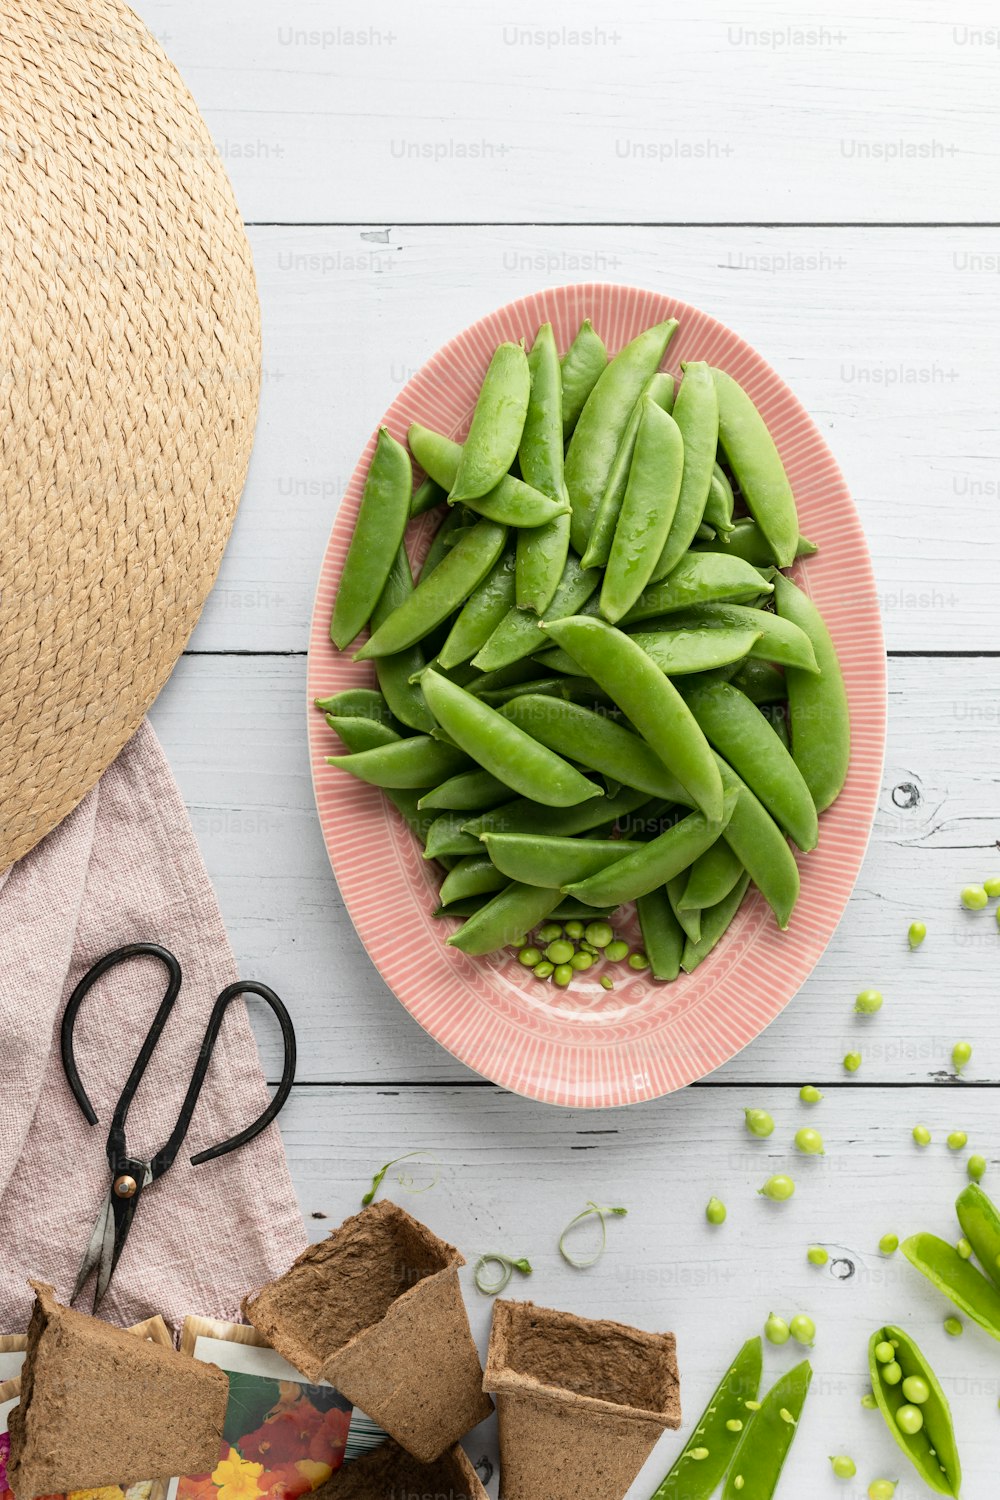 a plate of green beans next to a bowl of peas